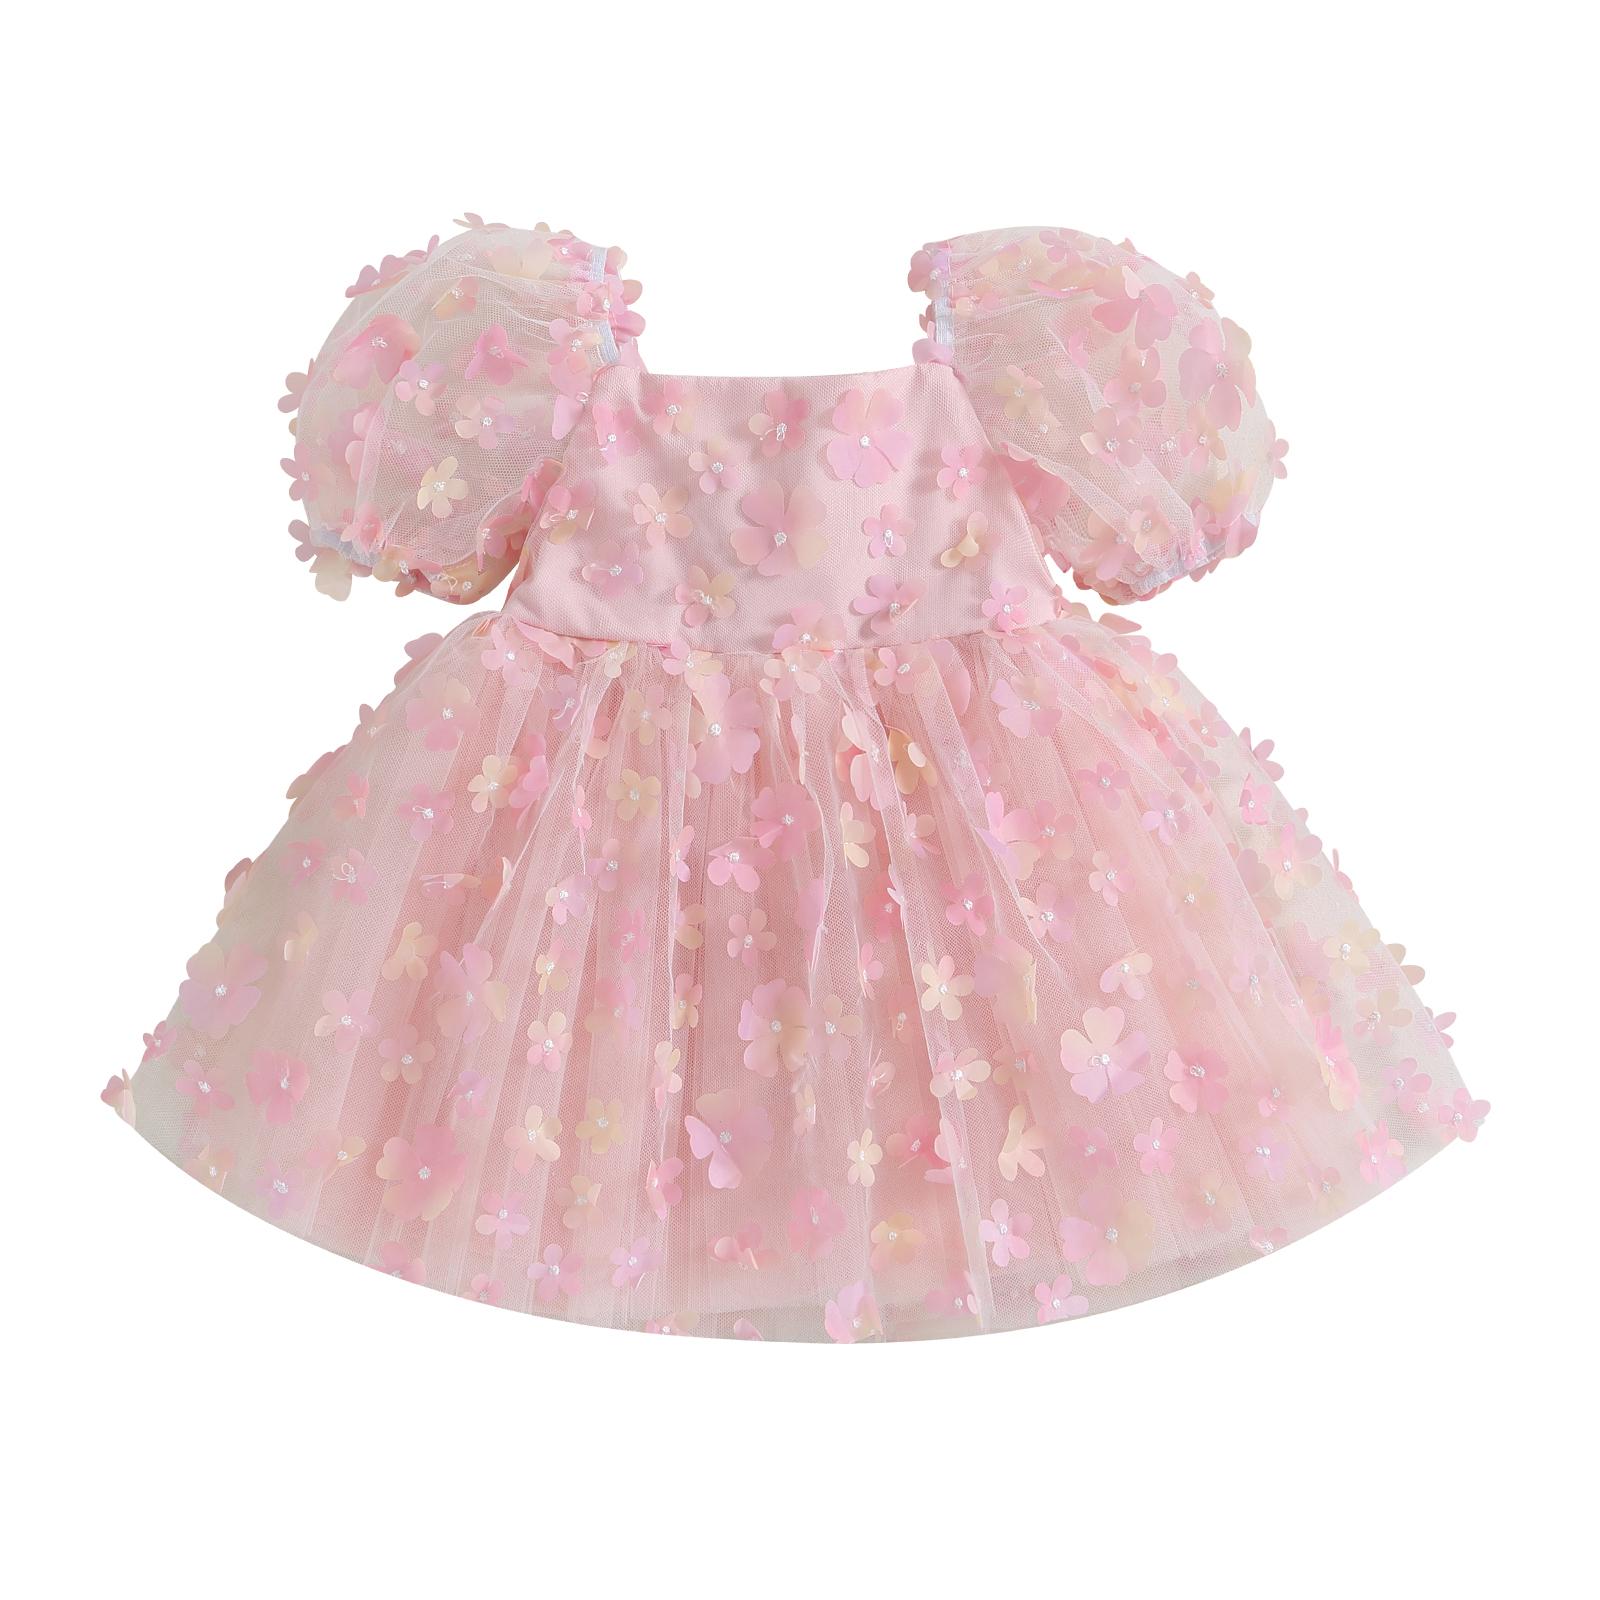 Little Fashionistas Summer Infant Baby Girl Outfits Mesh Lace Patchwork Ruffle Bodysuit Dress and Headband Cute Clothes 1-6 Years